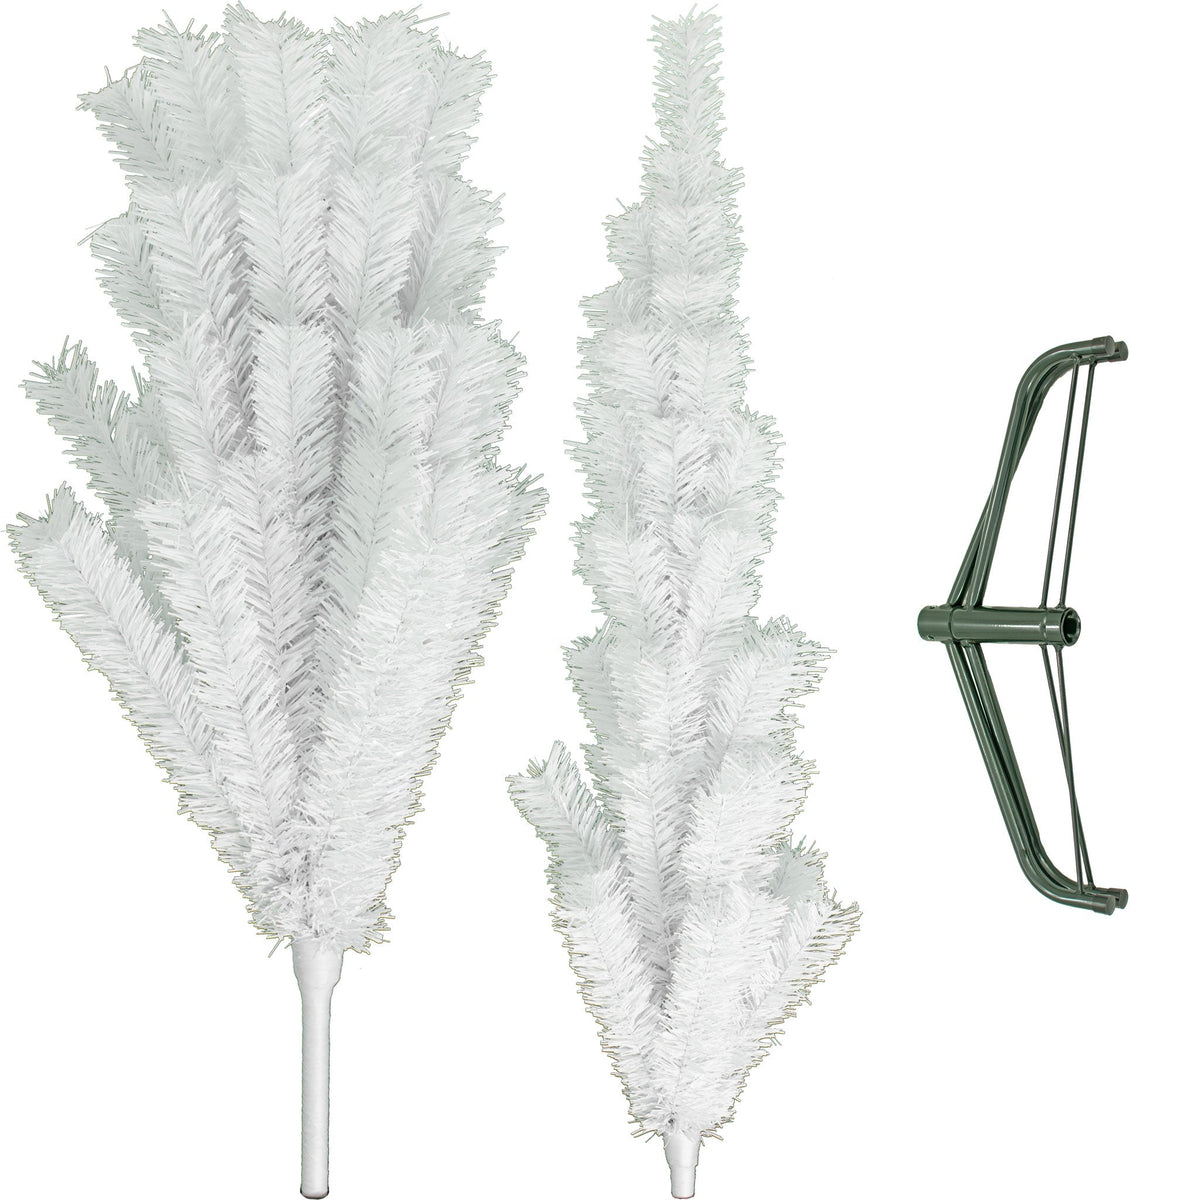 the 6ft tall white tinsel christmas tree comes with 2 parts with a green metal stand included.